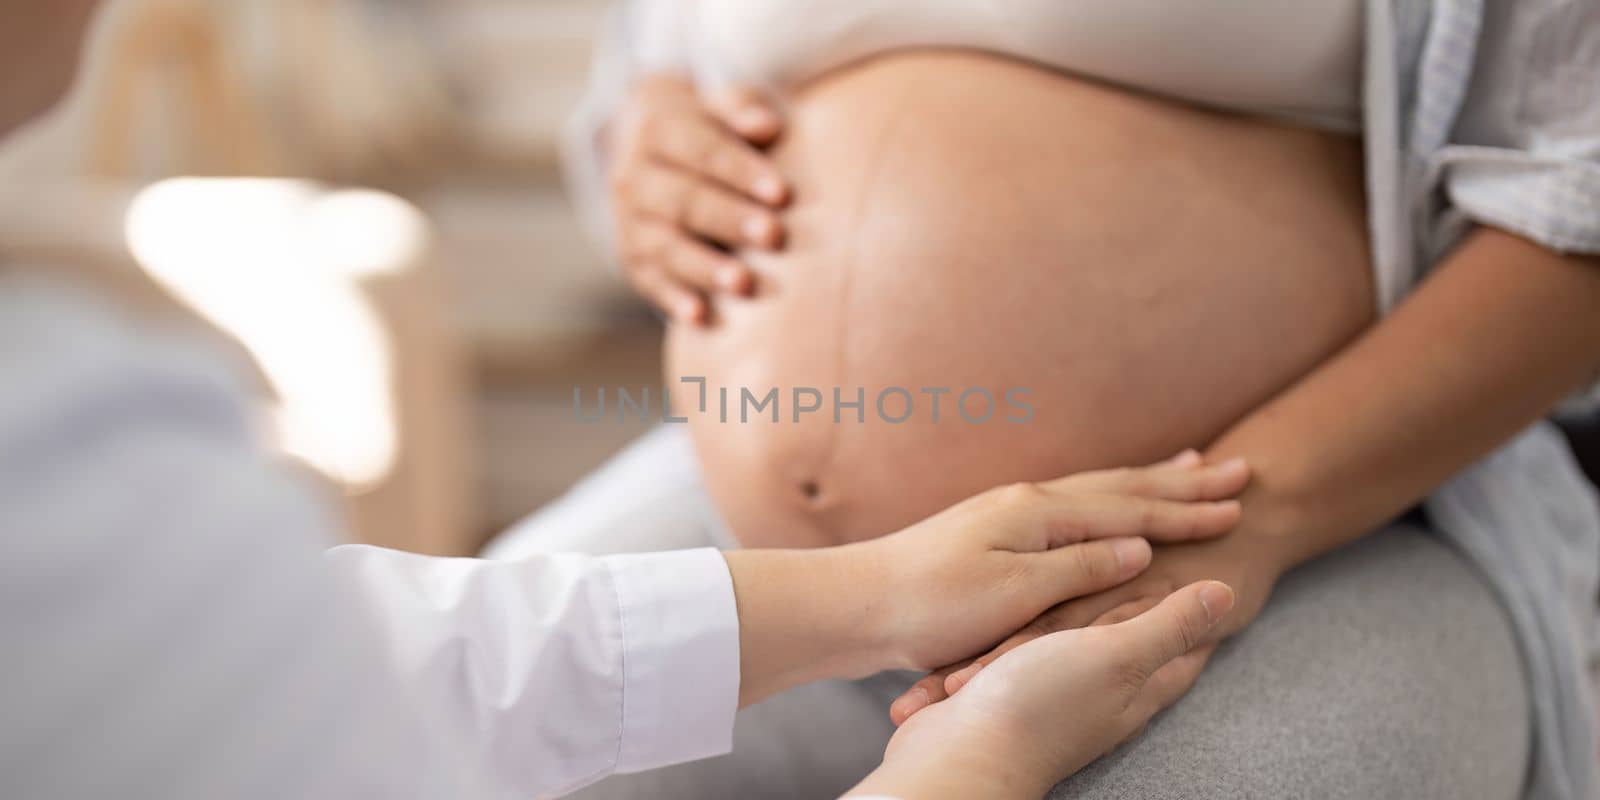 Healthcare, pregnancy and hands of doctor with pregnant woman for support, comfort and compassion. Medical care, family home and top view of health worker holding hands with maternal patient.